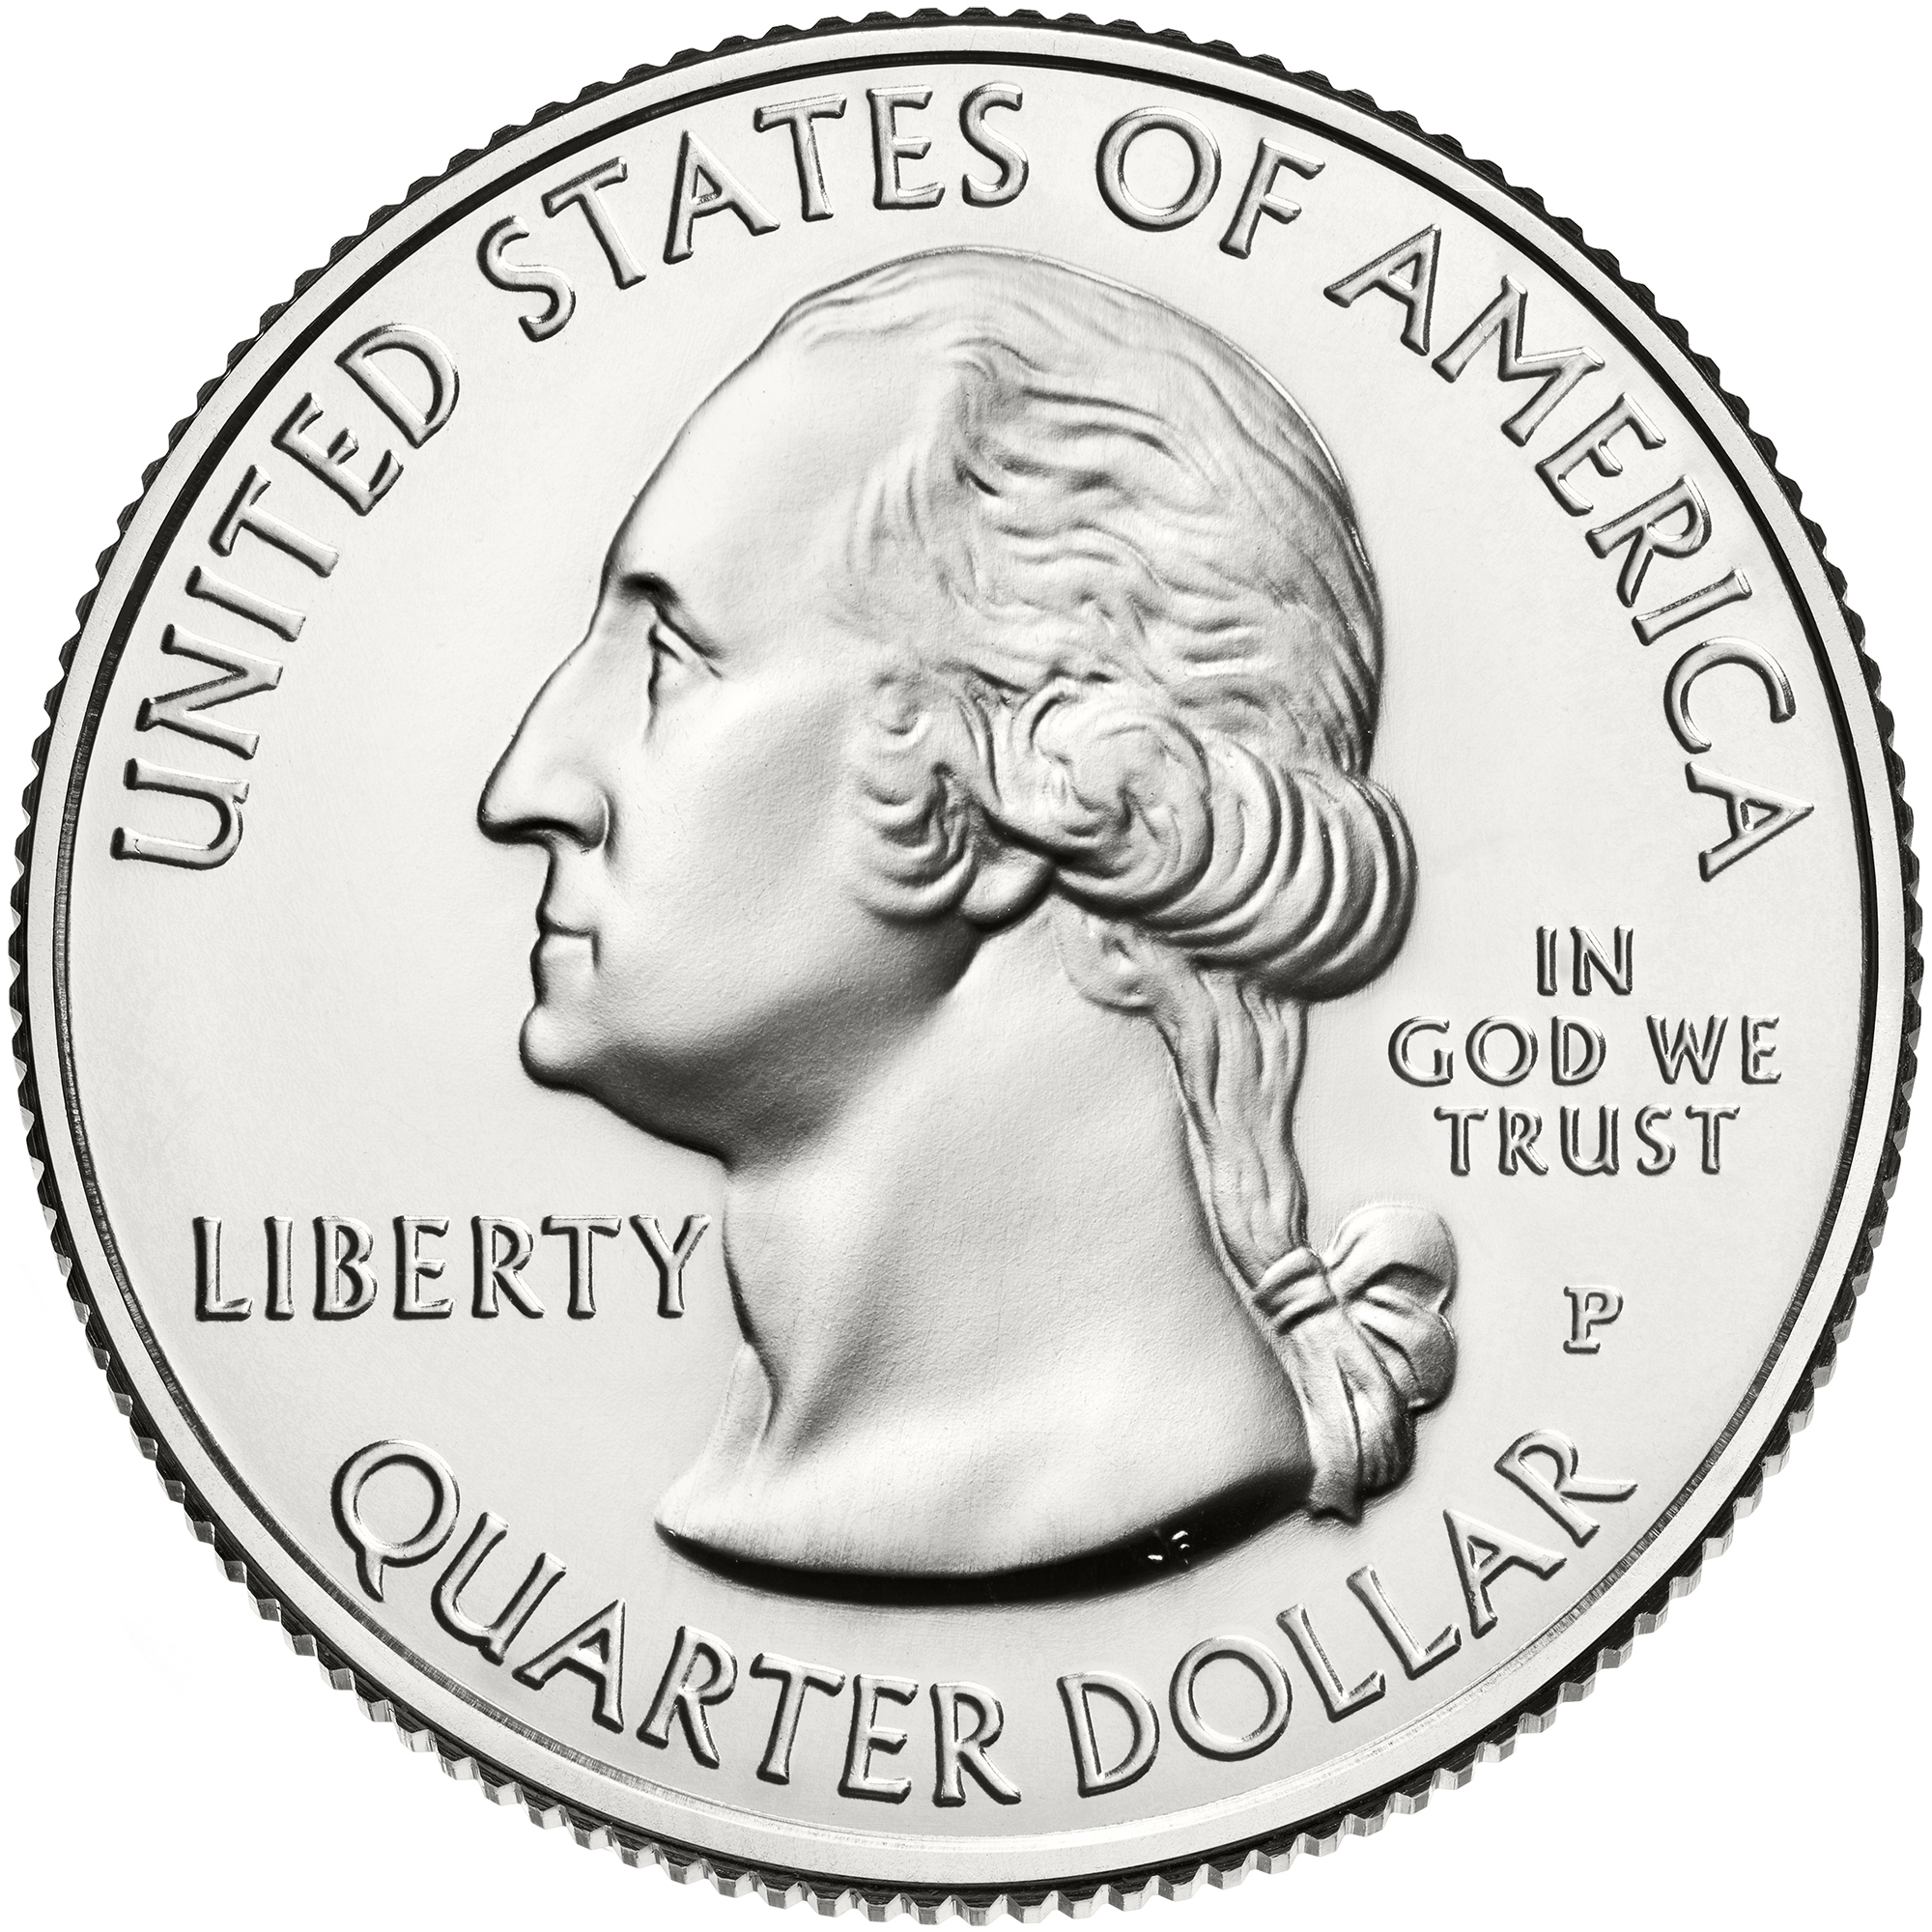 2014 America The Beautiful Quarters Coin Uncirculated Obverse P